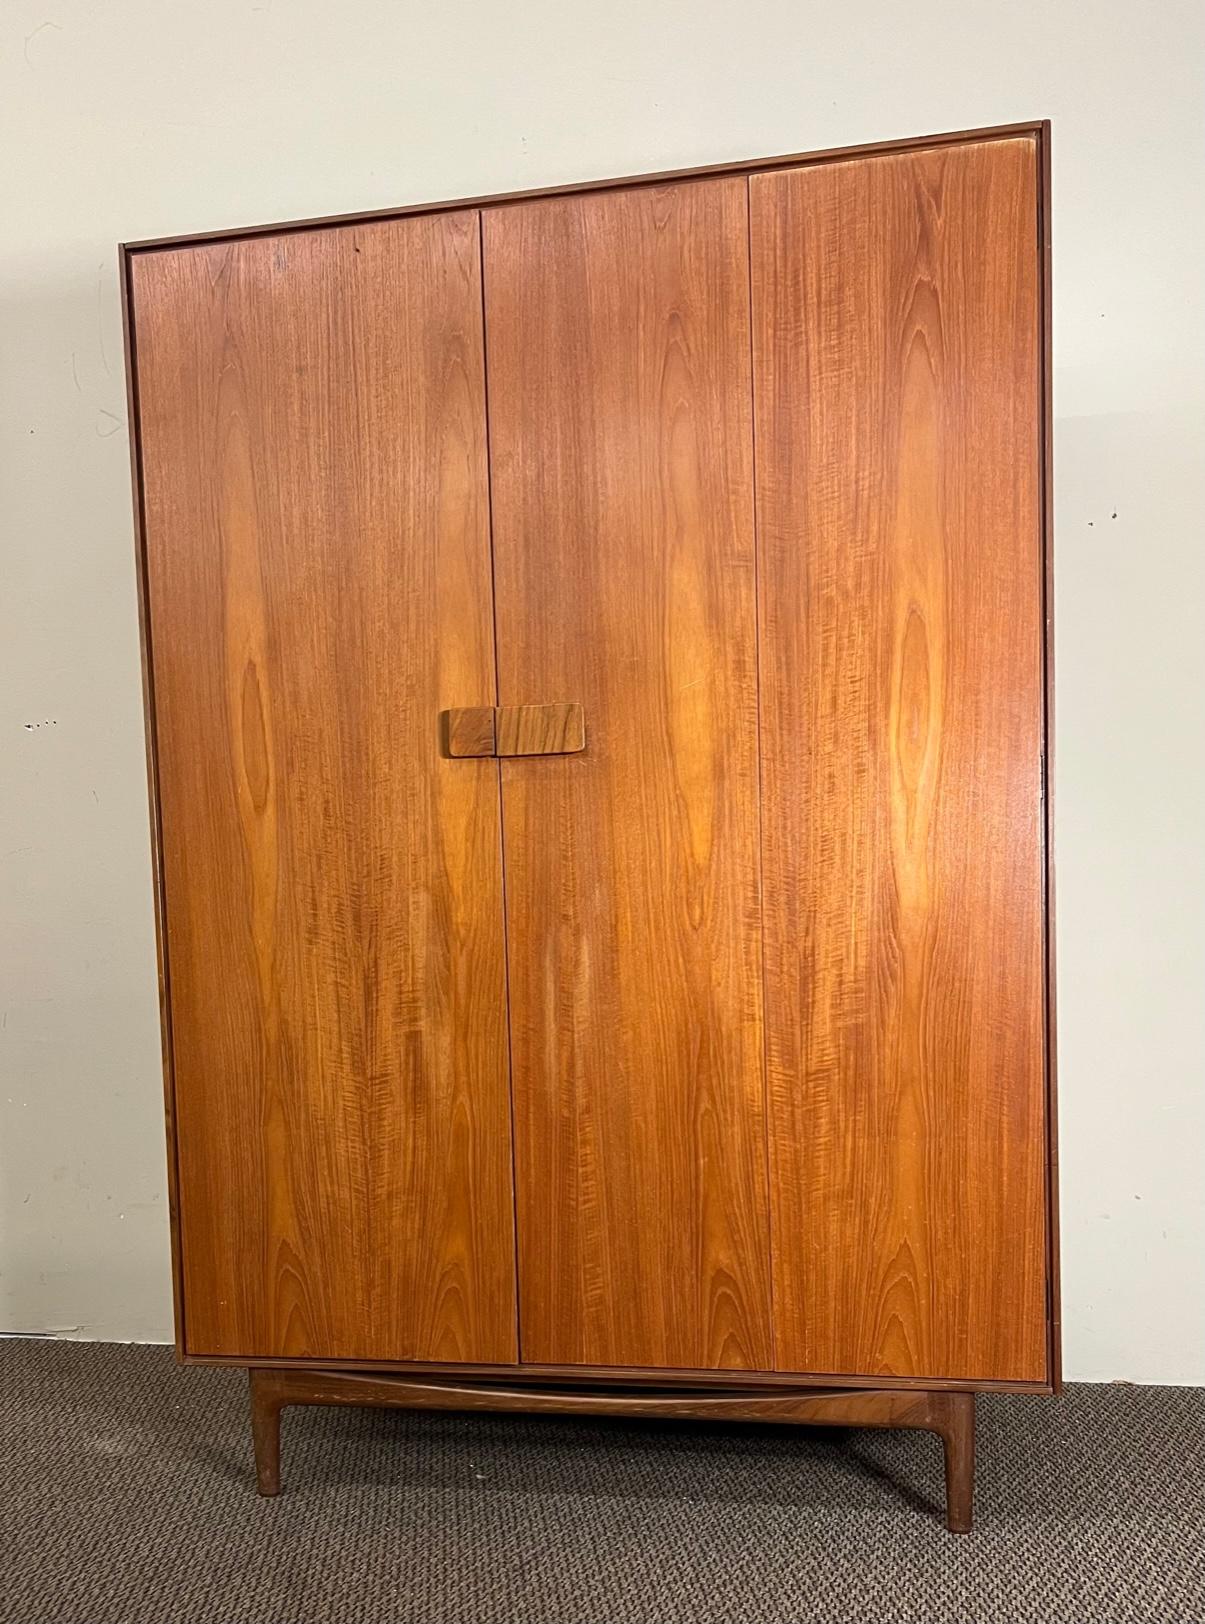 Amazing 3 door armoire by renowned Danish designer Kofod Larsen for G Plan's Danish range.
Teak with Larsen's signature rosewood handles. Signed on the left door.

Nice vintage condition. Some fading on the doors. Some small chips and marks from